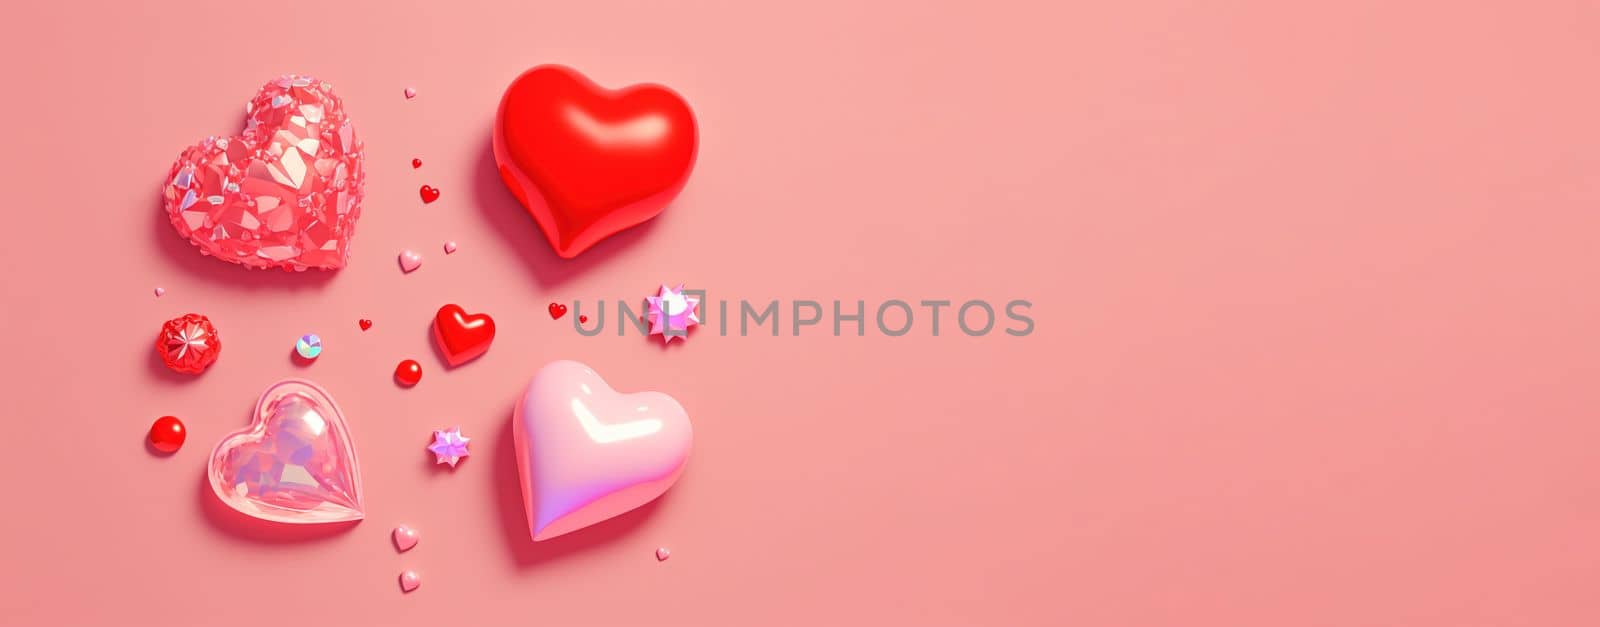 Valentine's Day 3D Illustration of Heart Crystal Diamond for Valentine's Day Promotion Banner and Background by templator